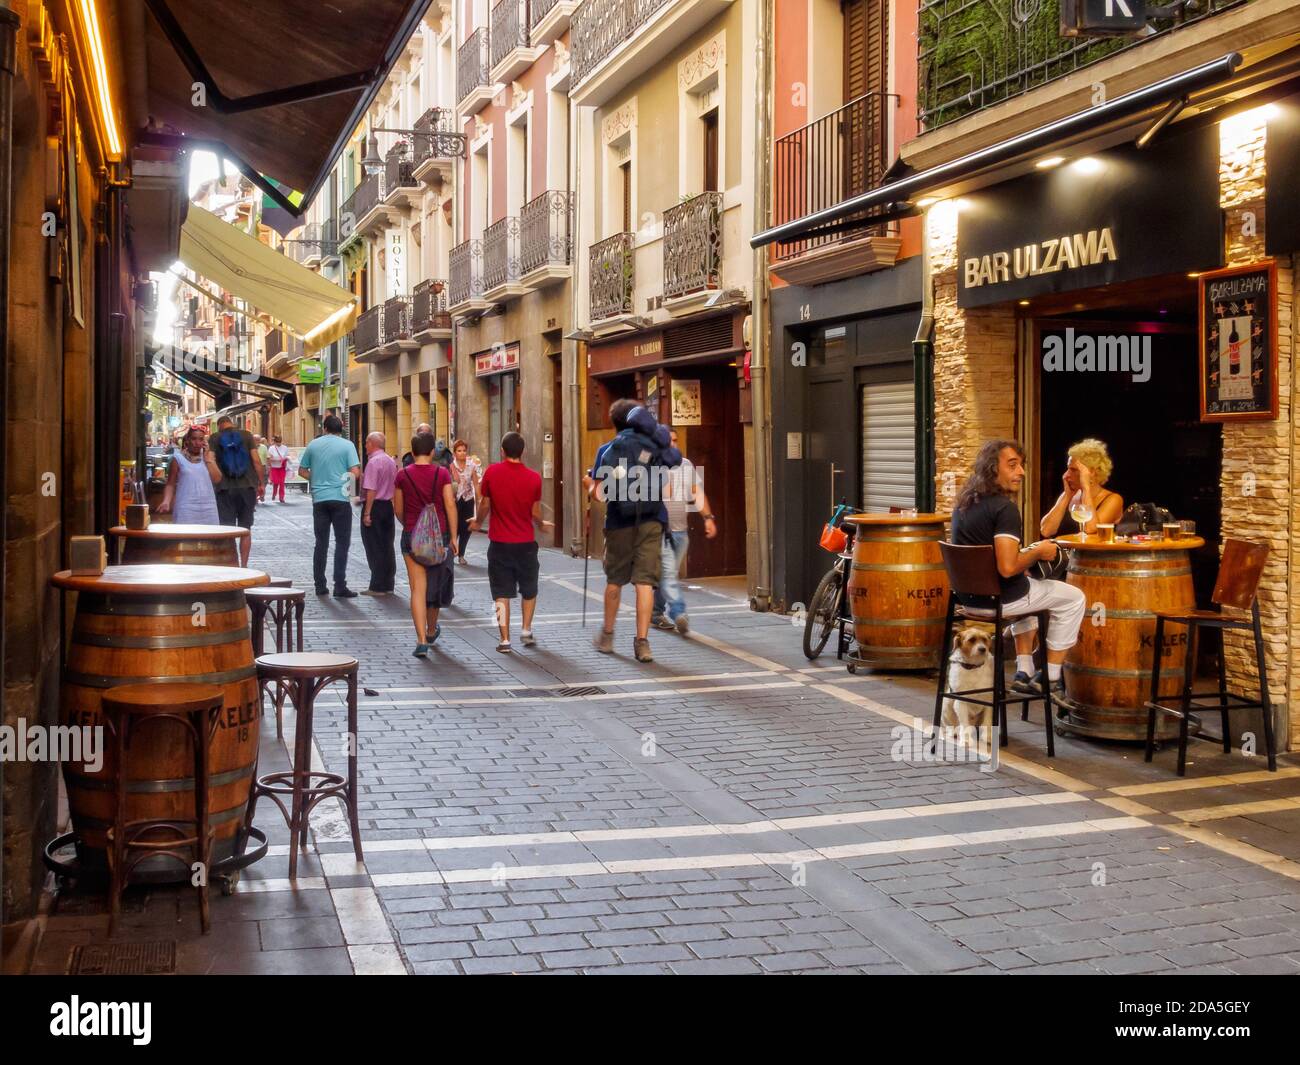 There are countless pubs, bars, taverns and restaurants in St Nicholas Street (Calle San Nicolas) - Pamplona, Navarre, Spain Stock Photo